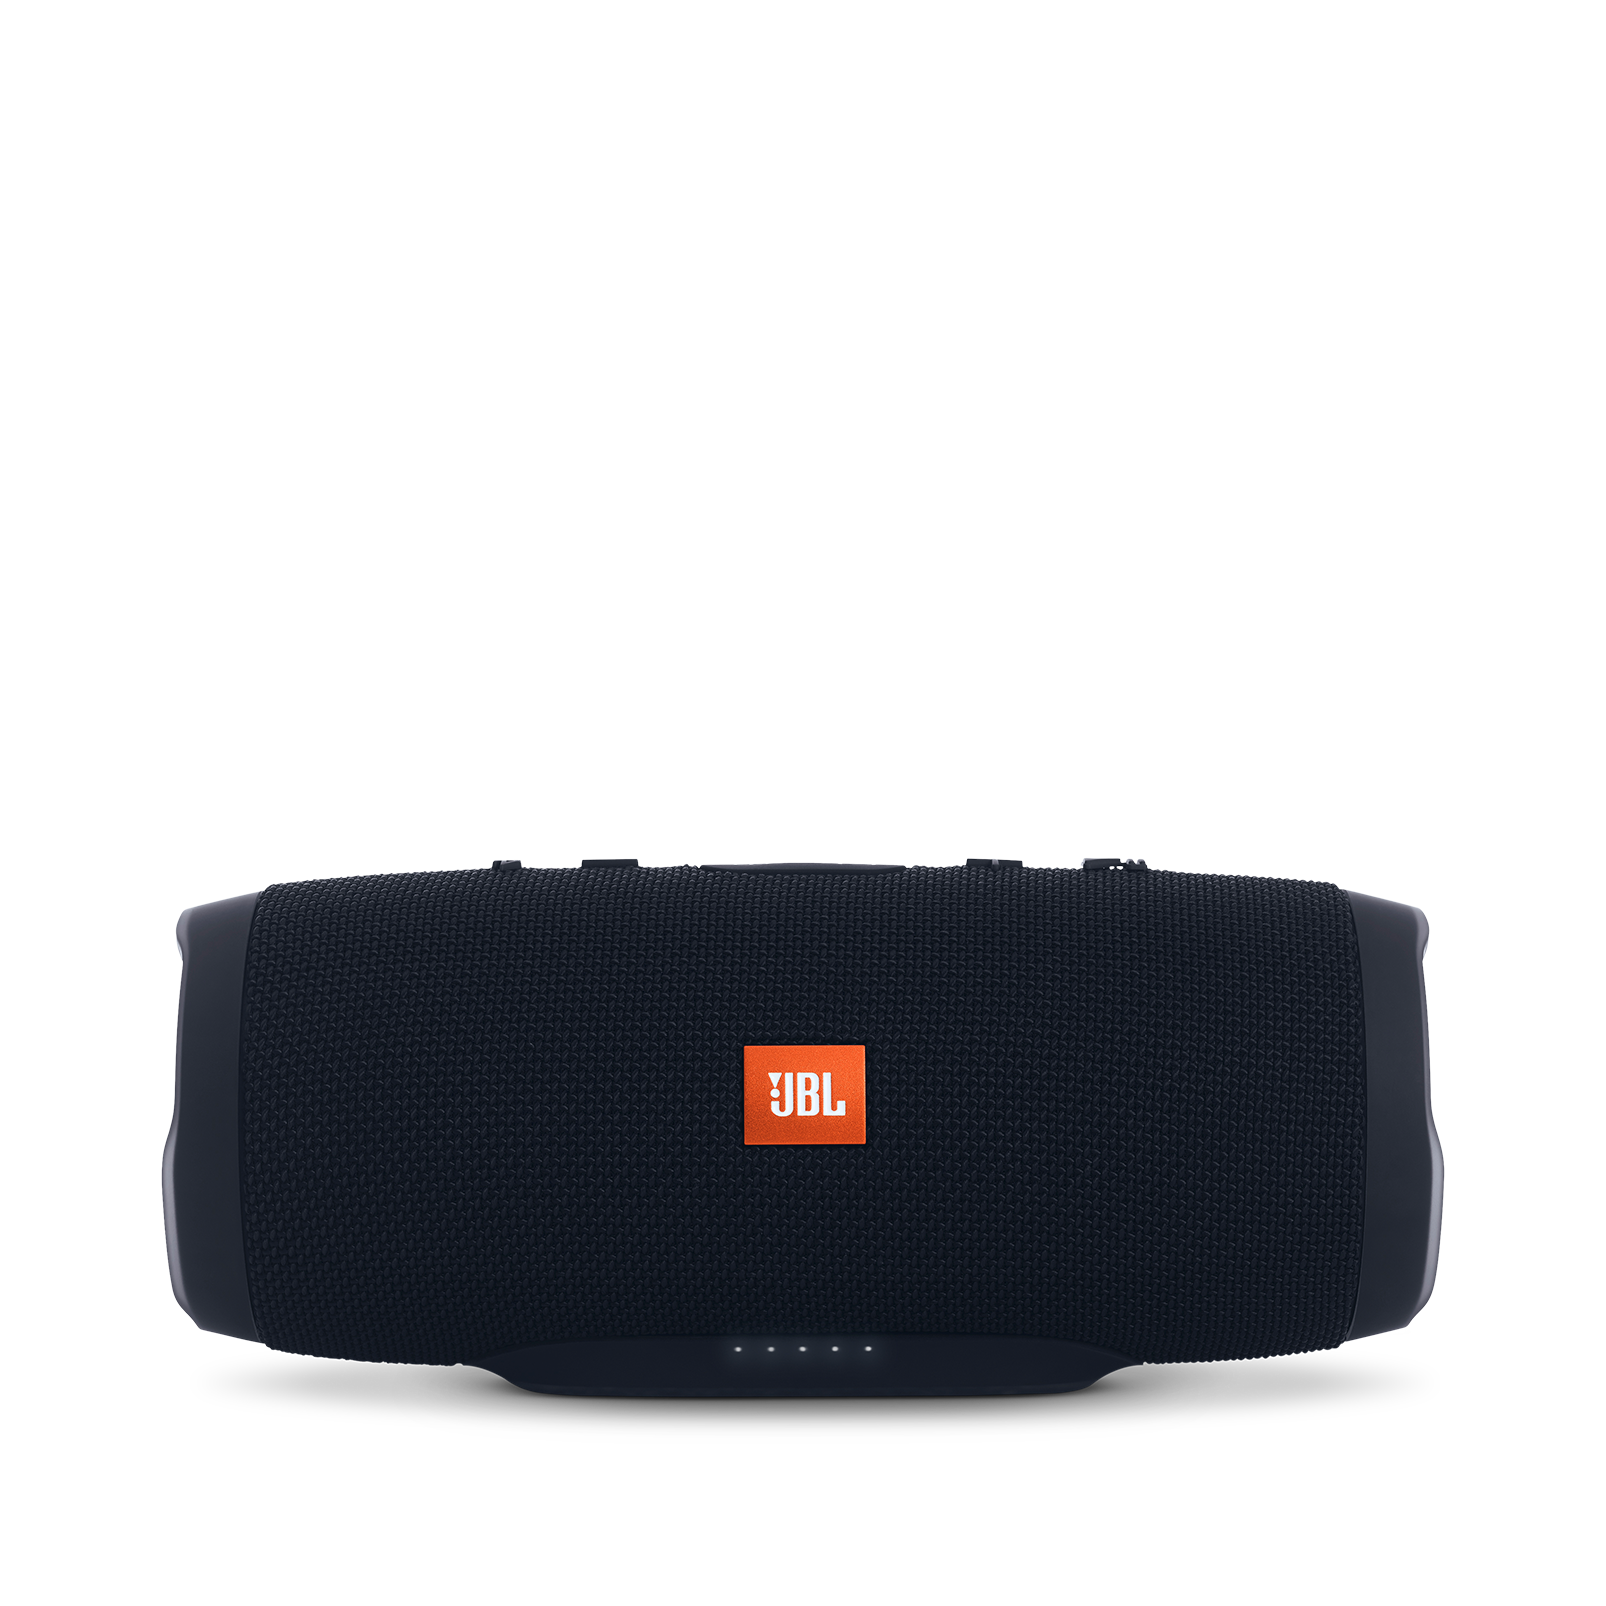 JBL Charge 3 - Black - Full-featured waterproof portable speaker with high-capacity battery to charge your devices - Front